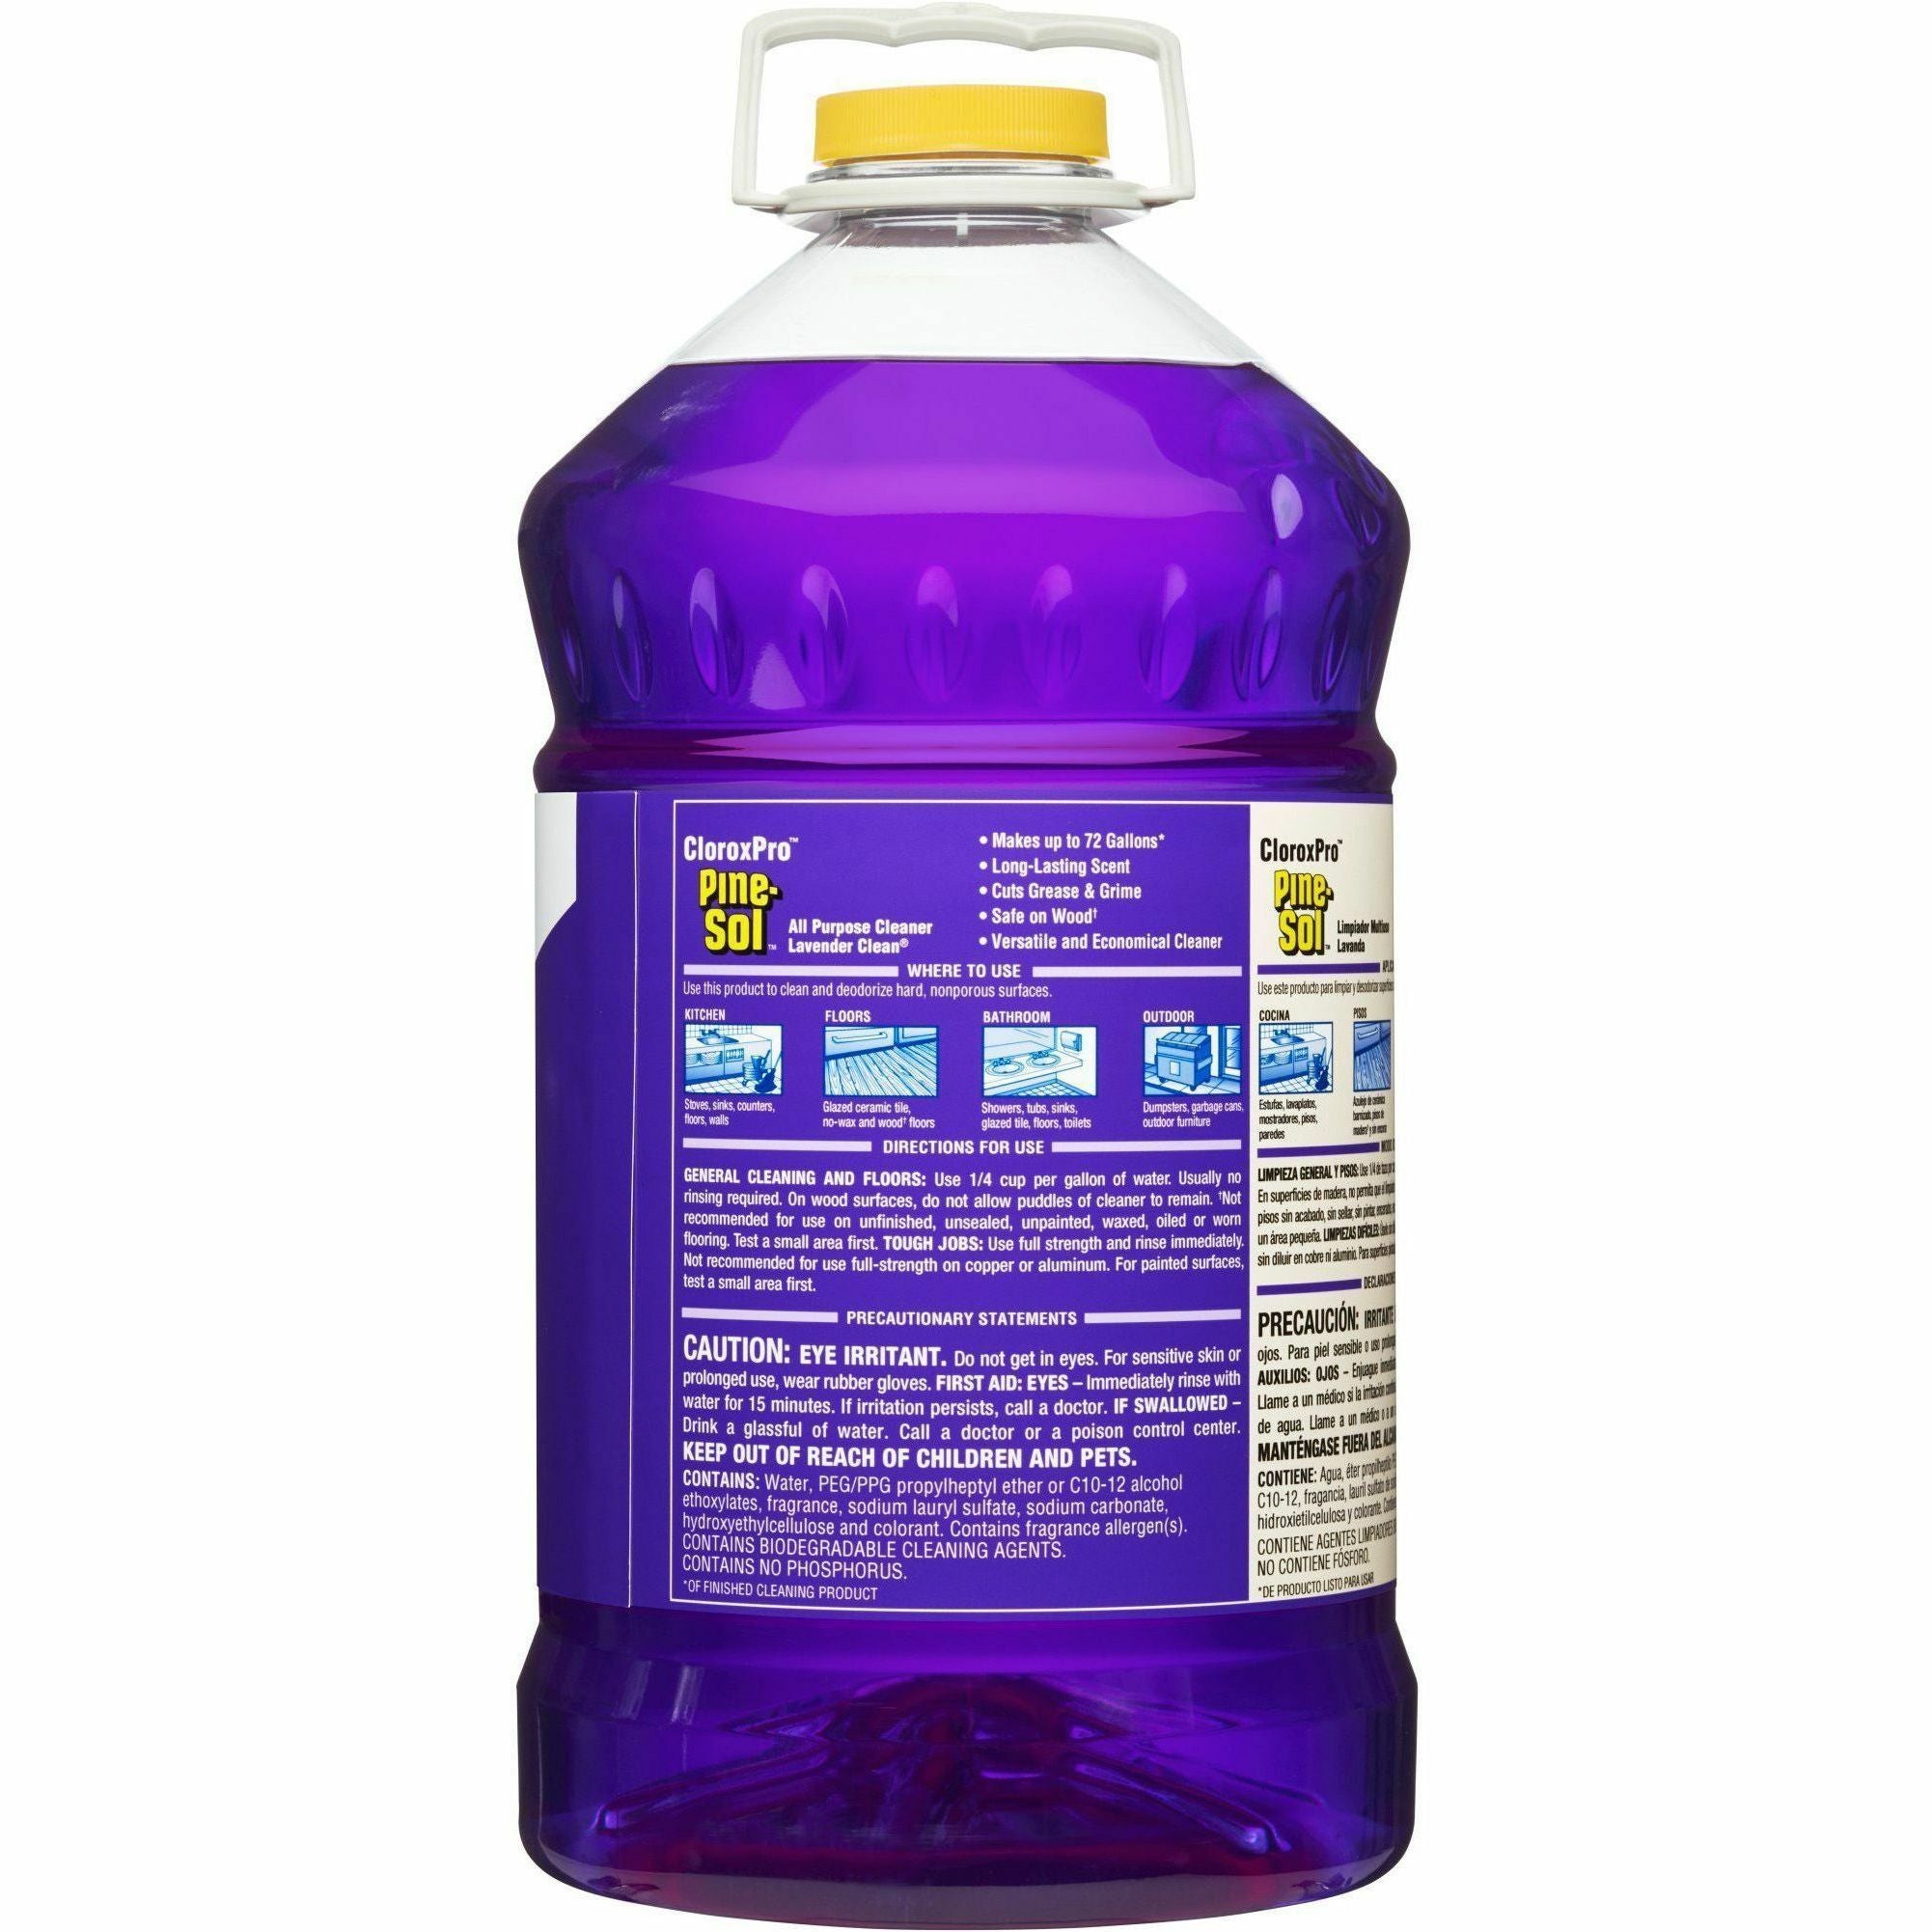 CloroxPro Pine-Sol All Purpose Cleaner - Concentrate - 144 fl oz (4.5 quart) - Lavender Clean Scent - 126 / Pallet - Water Soluble, Deodorize, Antibacterial - Purple - 2